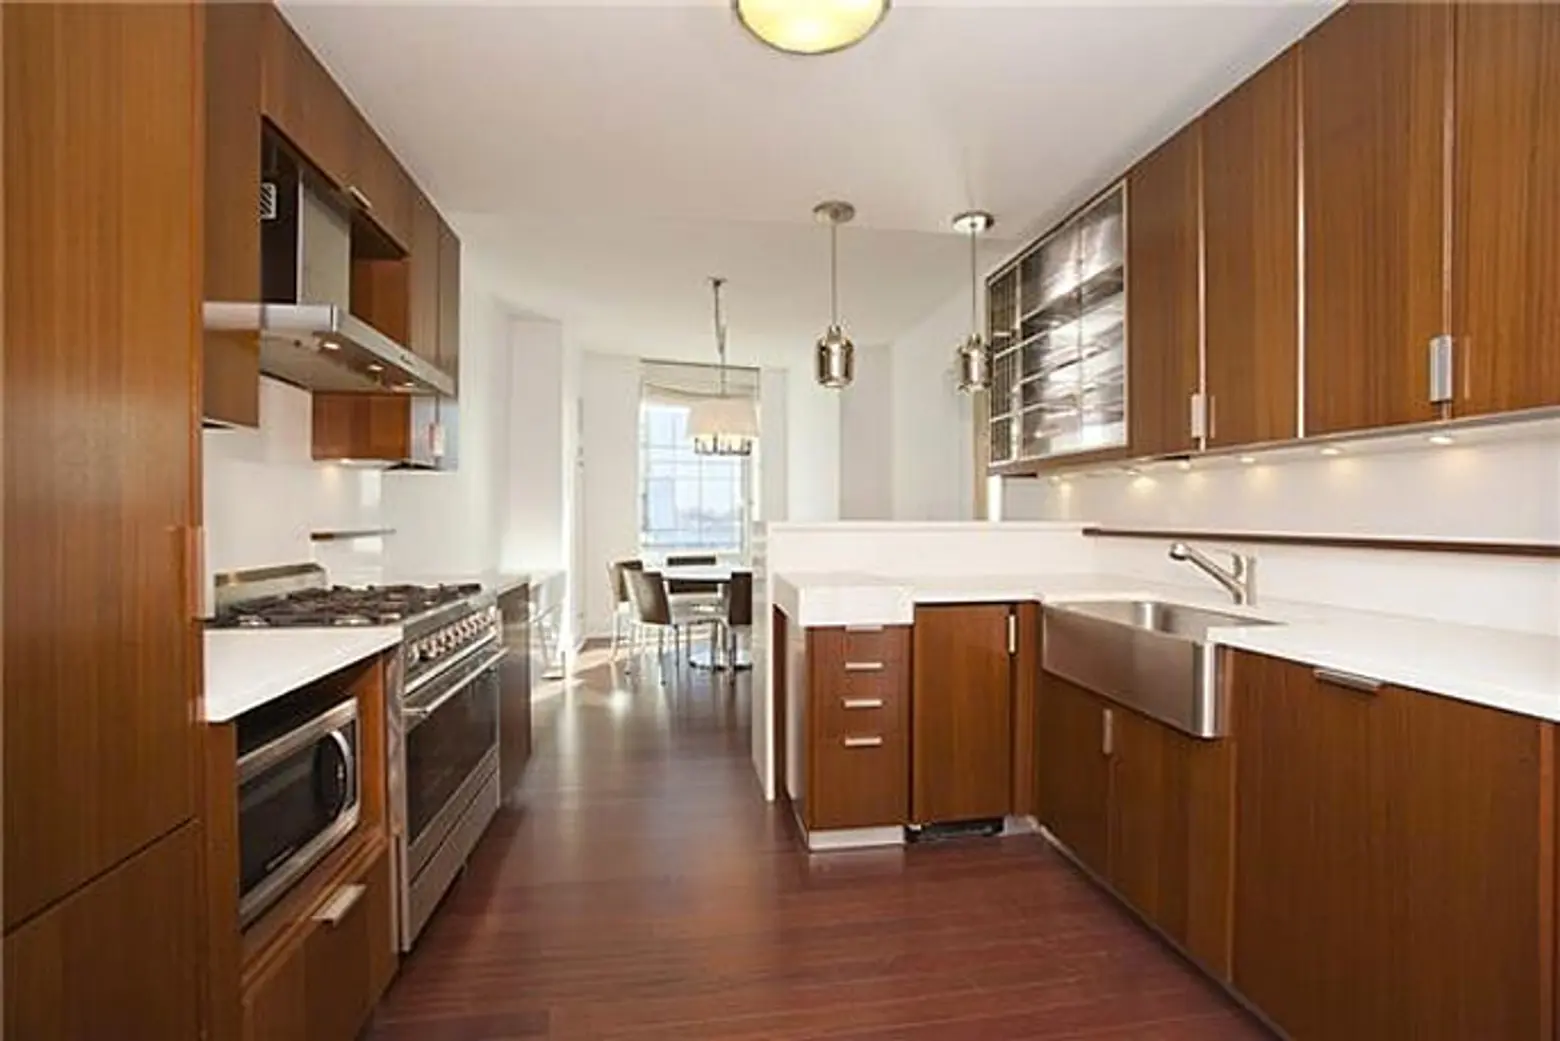 Rent Former Brooklyn Nets Coach Jason Kidd’s Amenity-Packed Apartment for $20K a Month